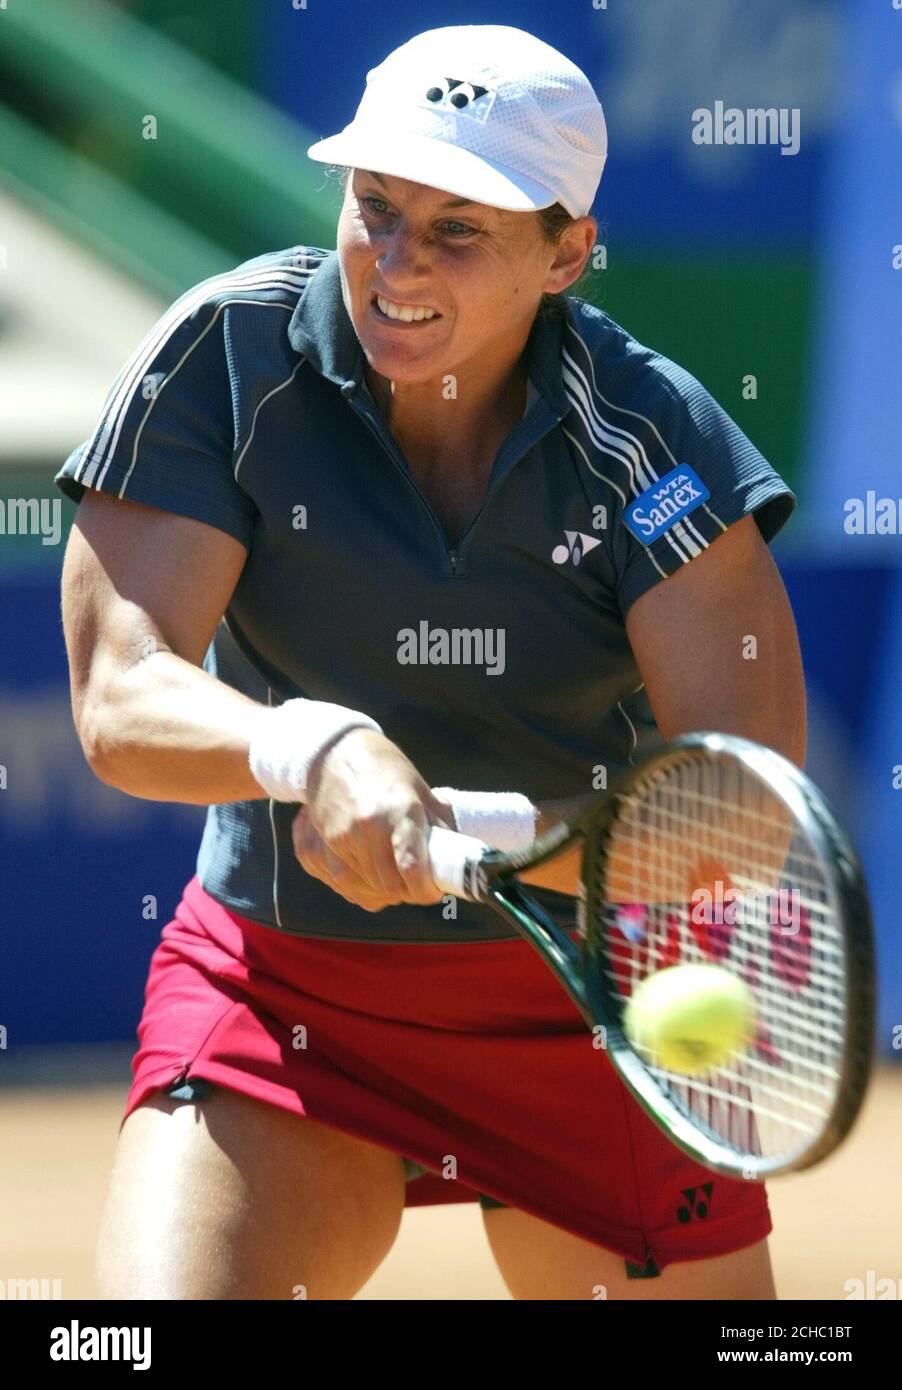 Tennis player Monica Seles of the United States returns a ball to her  countrywoman Chanda Rubin during their final of the Spanish Women's Open in  Madrid, May 25, 2002. Seles won 6-4